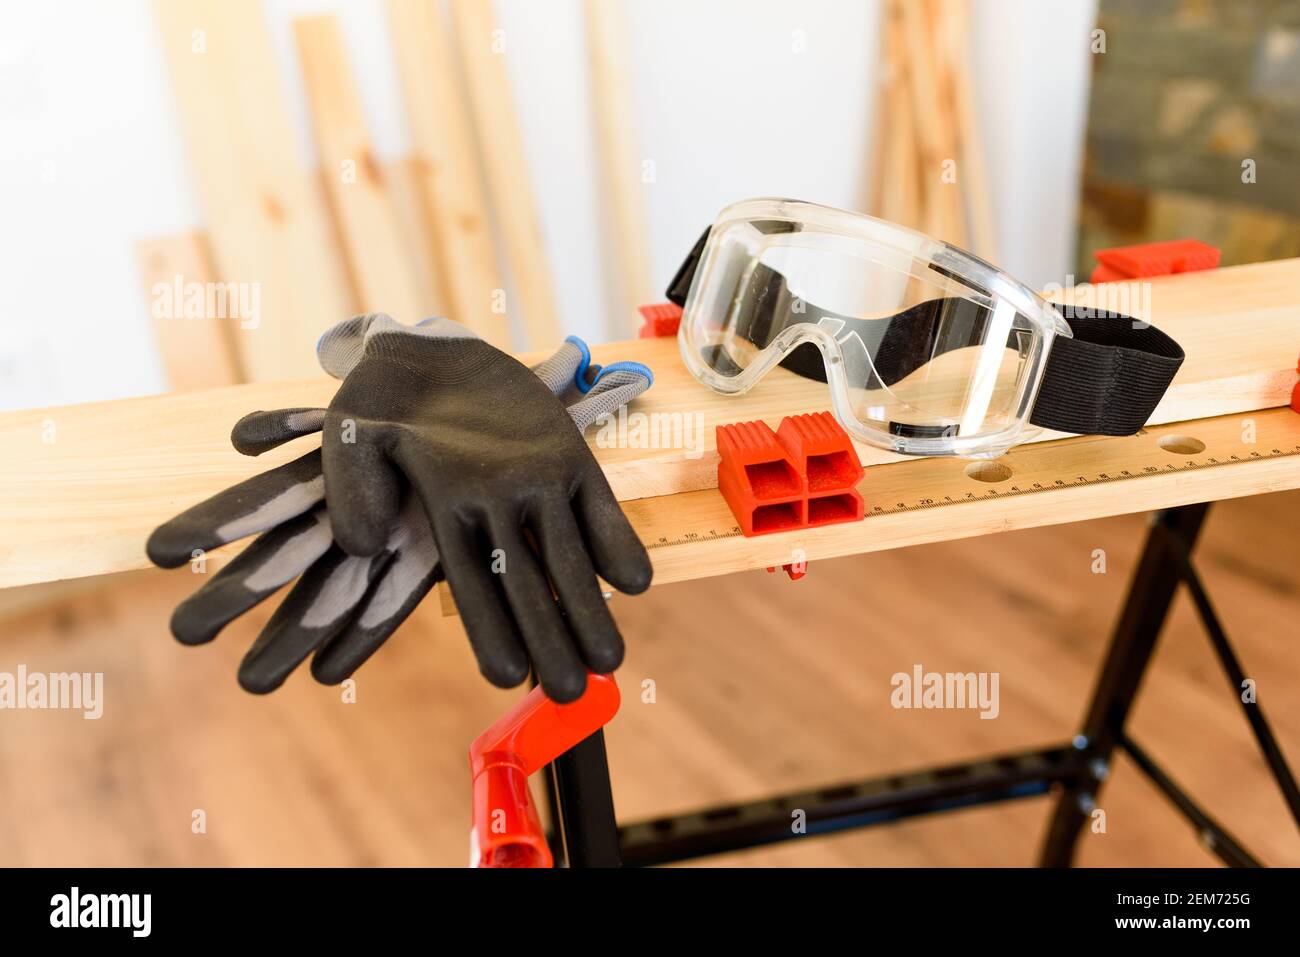 Workbench with protective glasses and safety gloves, without anyone. Inside a flat with wooden floors and white walls. It is daytime and there is natu Stock Photo